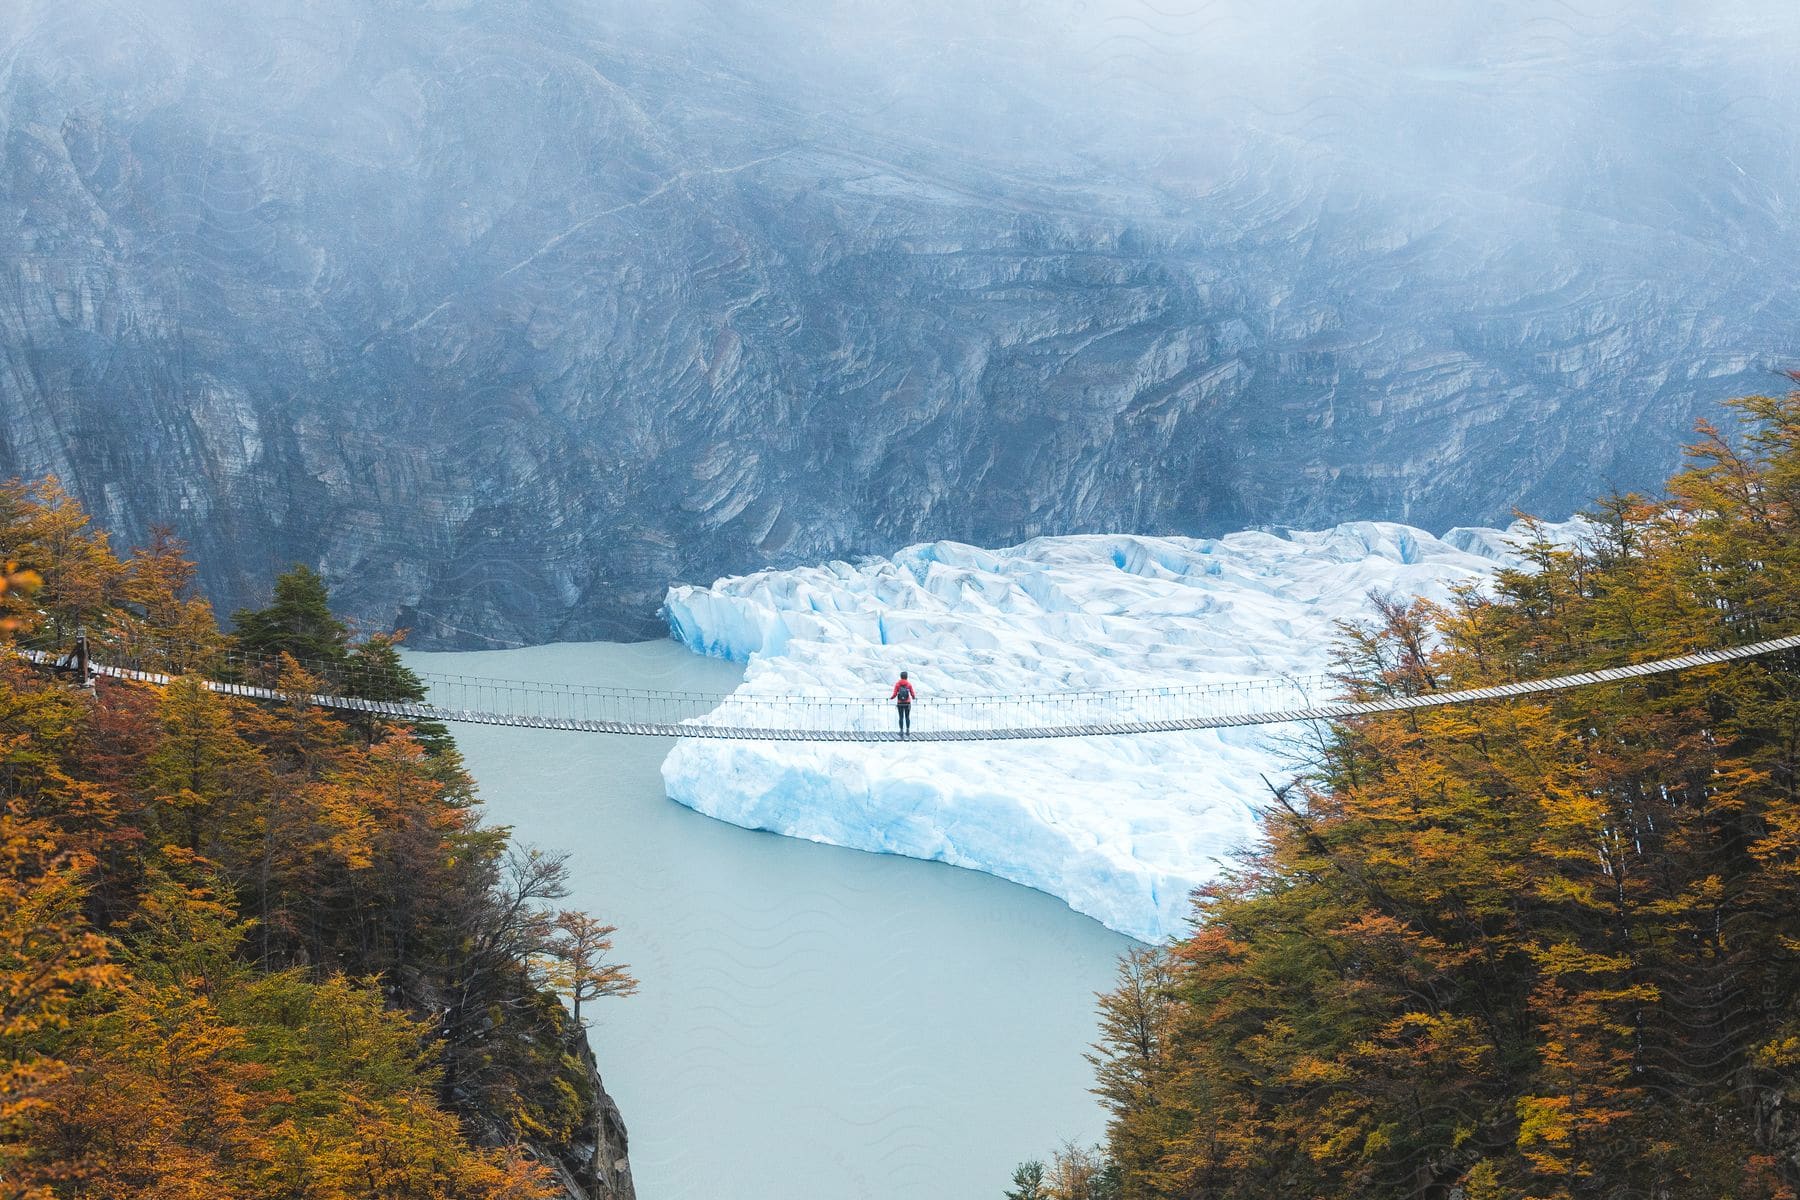 A lone figure traverses a suspension bridge over a river, framed by mountains, a glacier, and autumn foliage